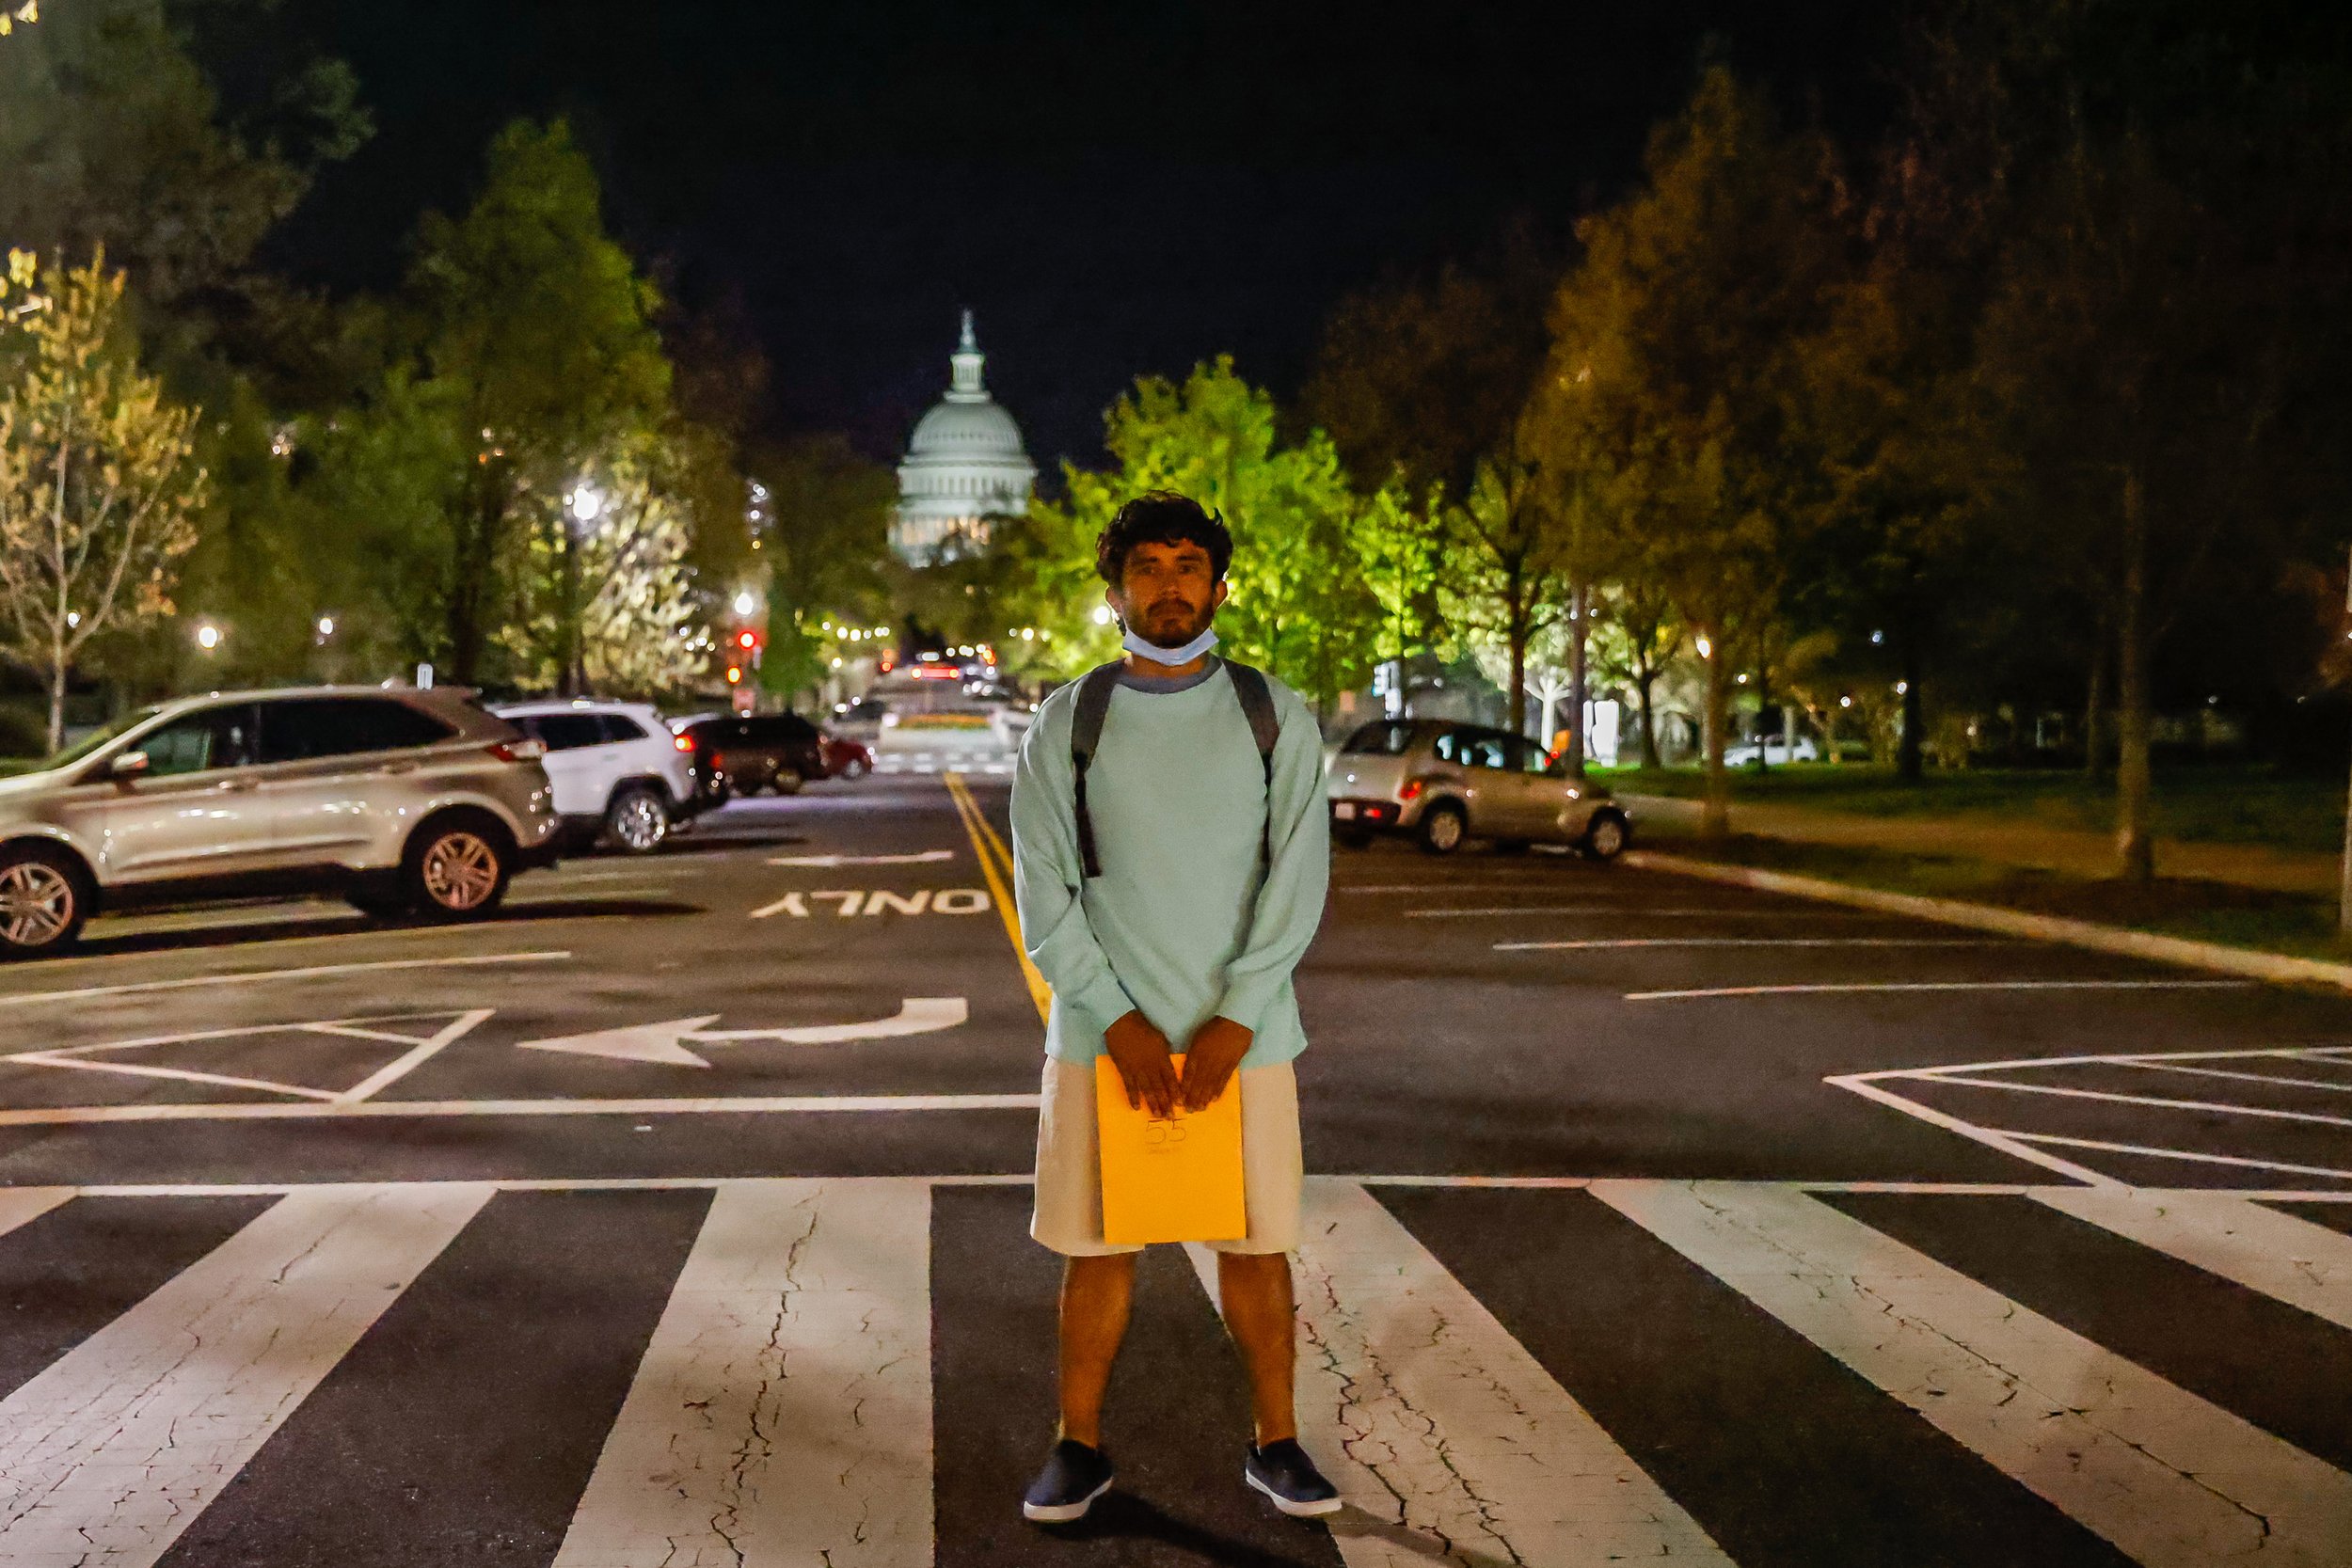  Victor Rodriguez, 26, poses for a portrait in Washington, D.C. on Thursday, April 21, 2022. Rodriguez, originally from Venezuela, started to travel by foot from his home country to the United States on March 13th, making a trip that lasted 36 days t